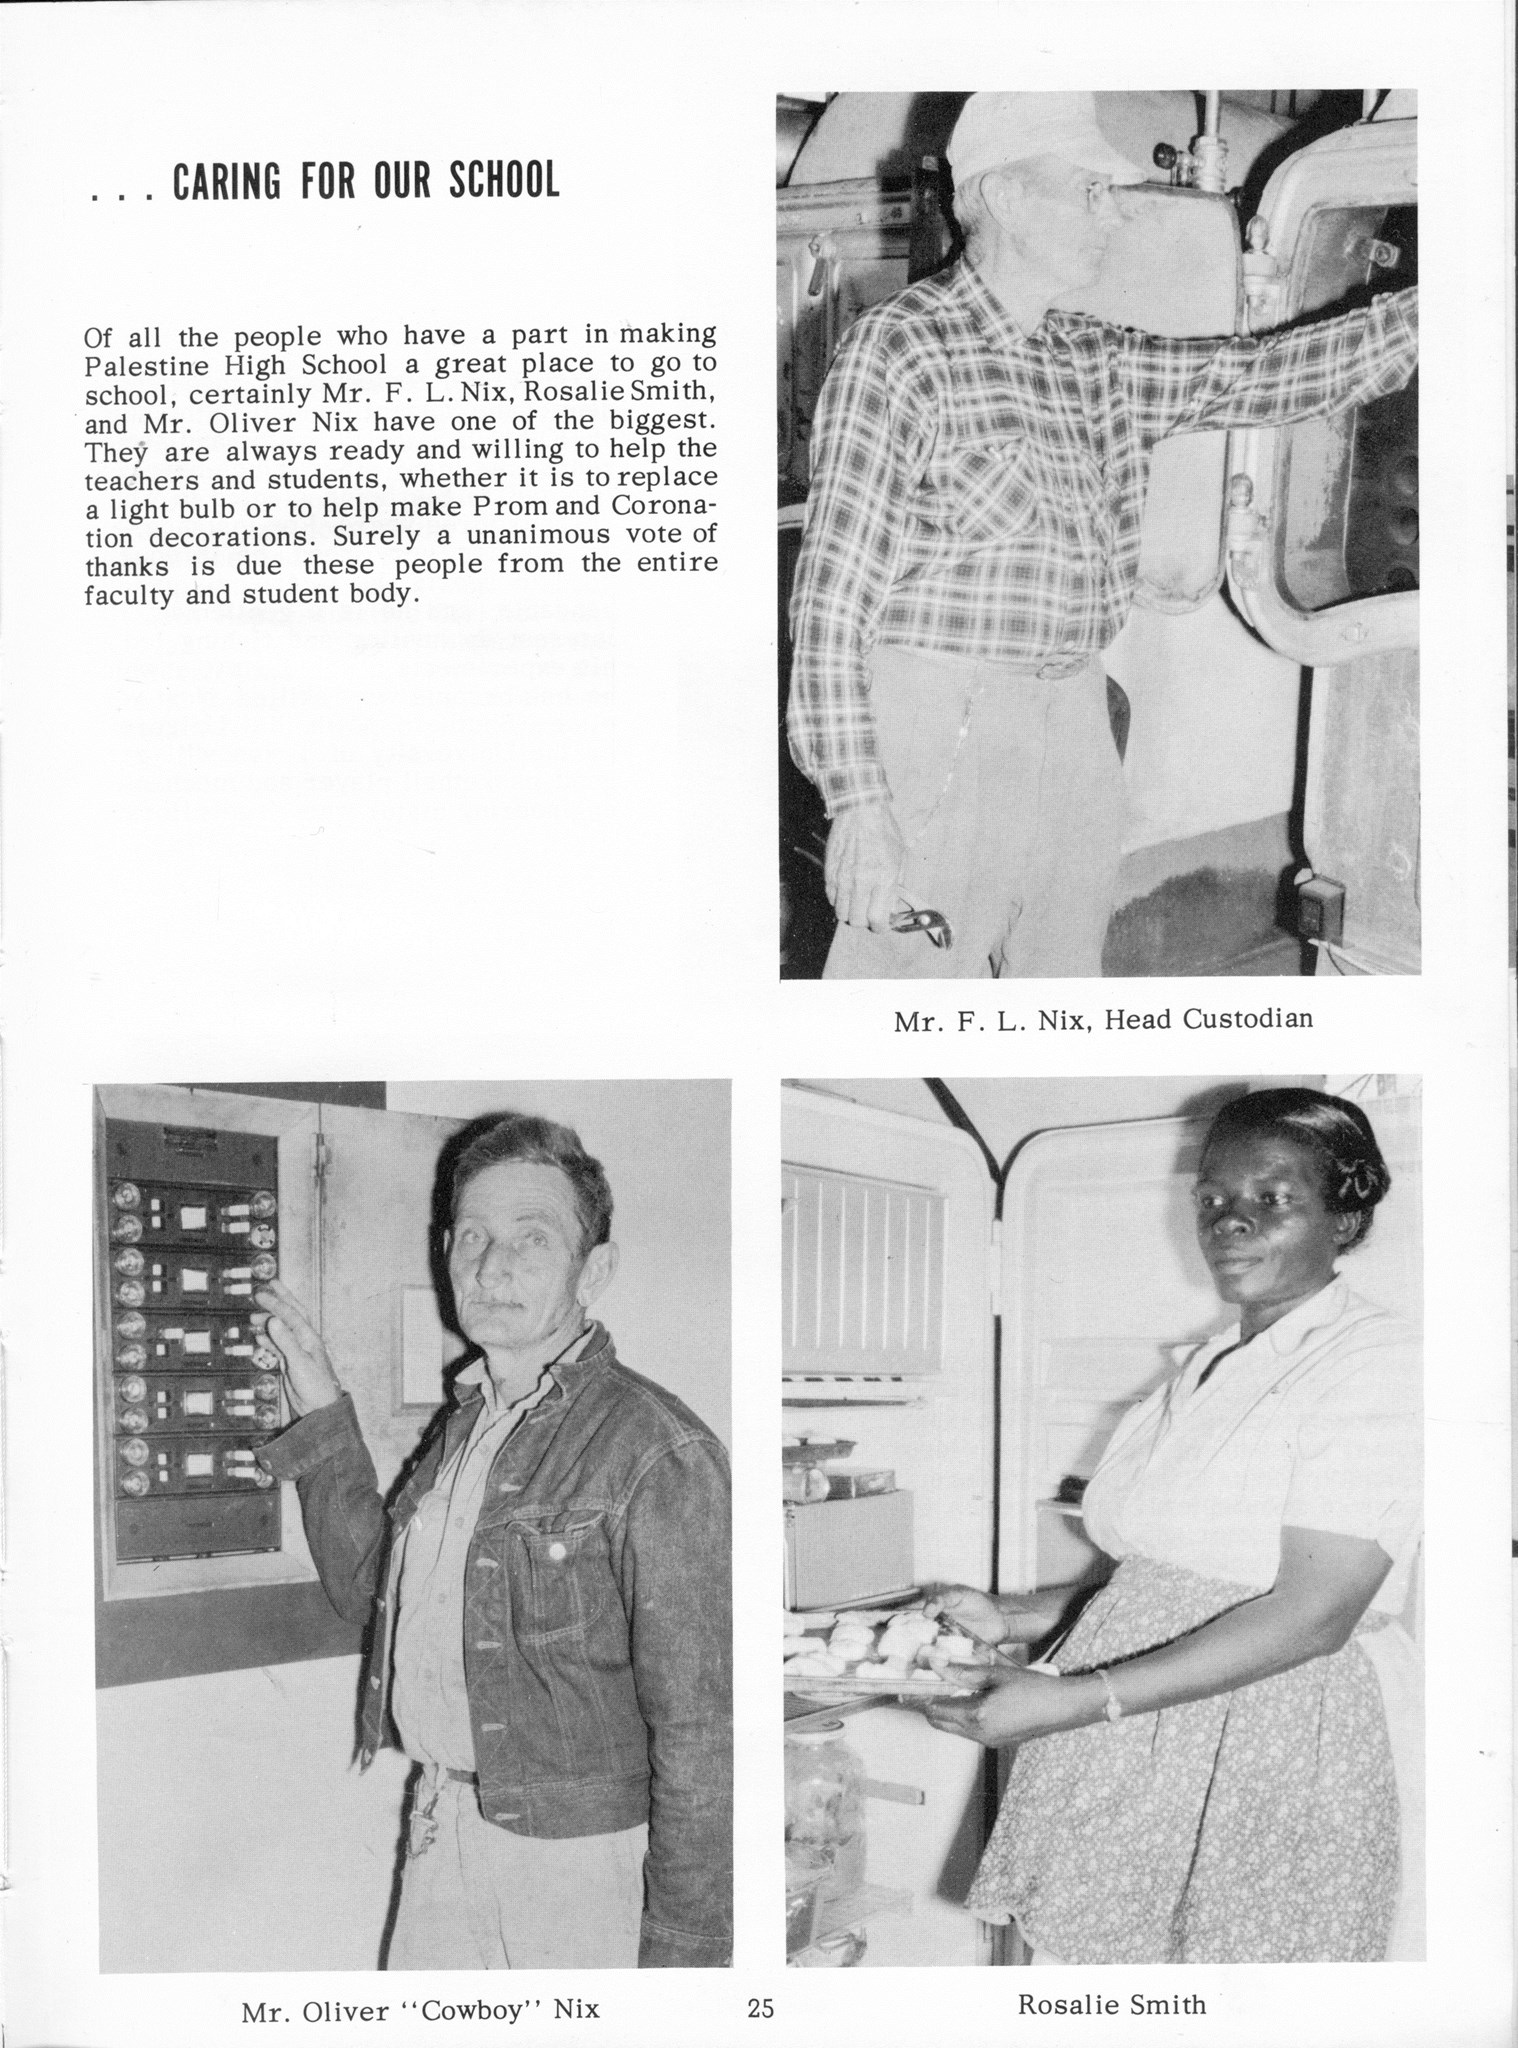 ../../../Images/Large/1960/Arclight-1960-pg0025.jpg